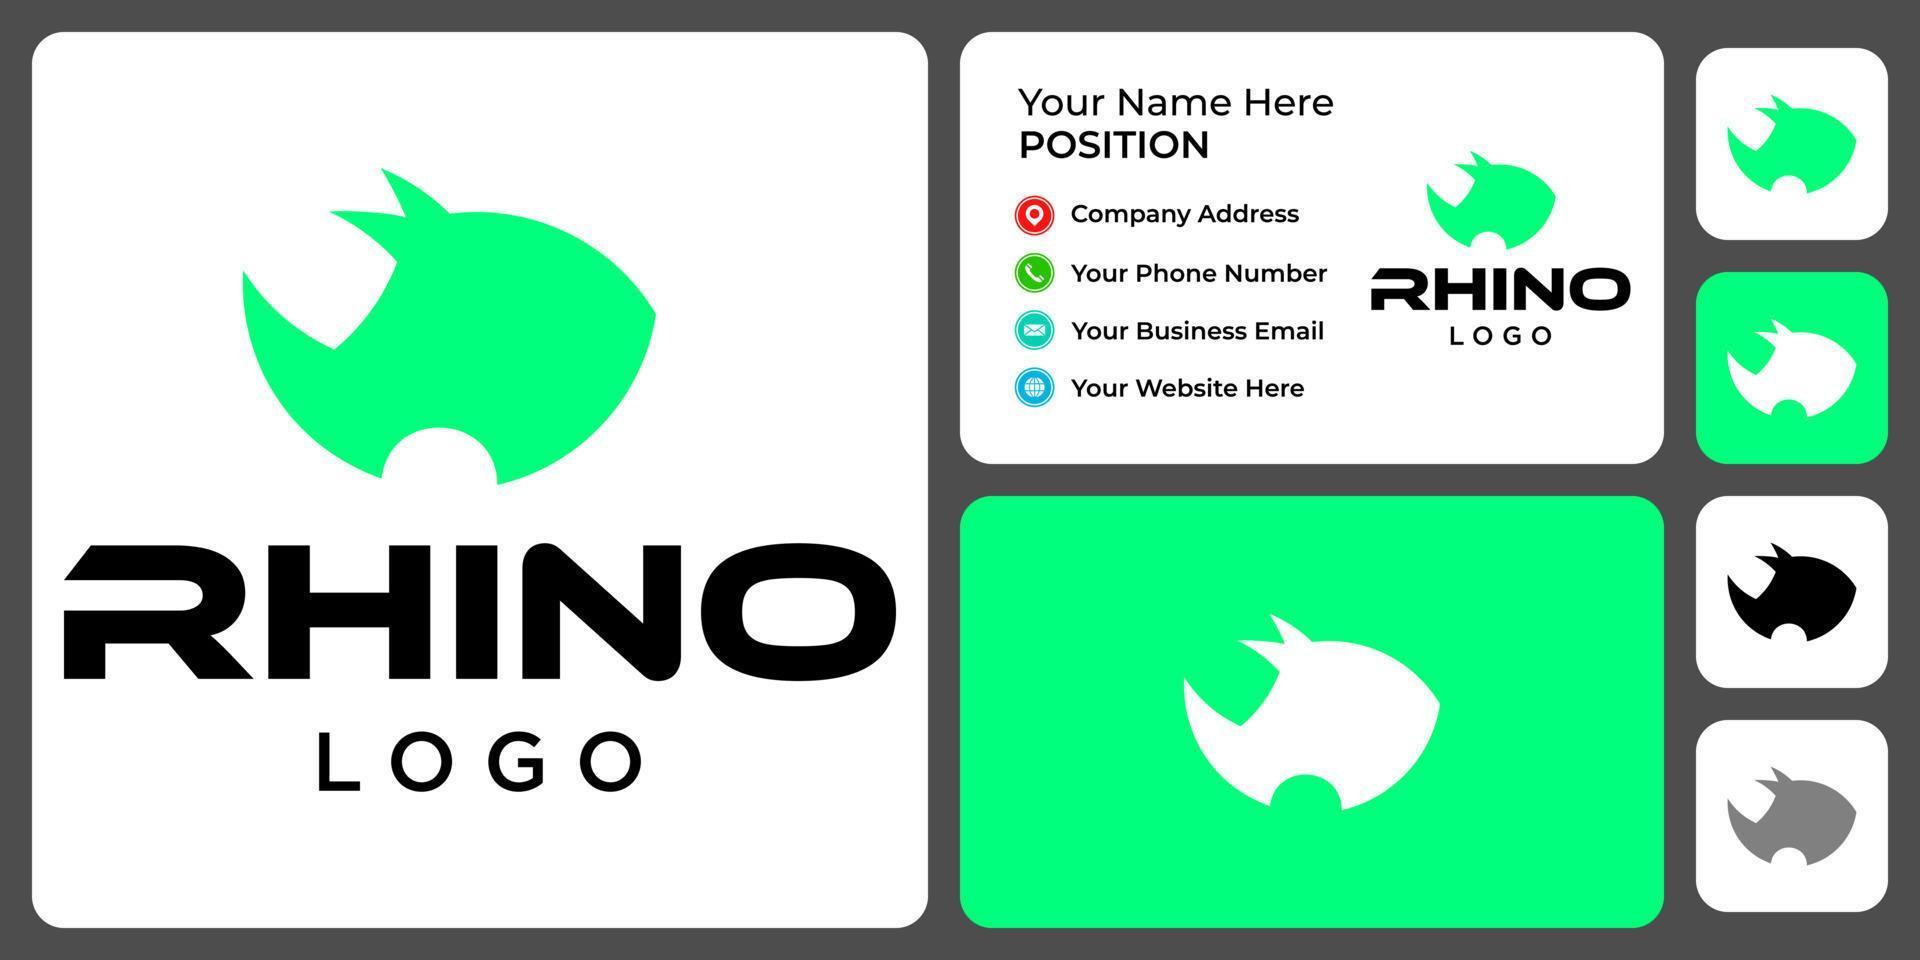 Rhino logo design with business card template. vector